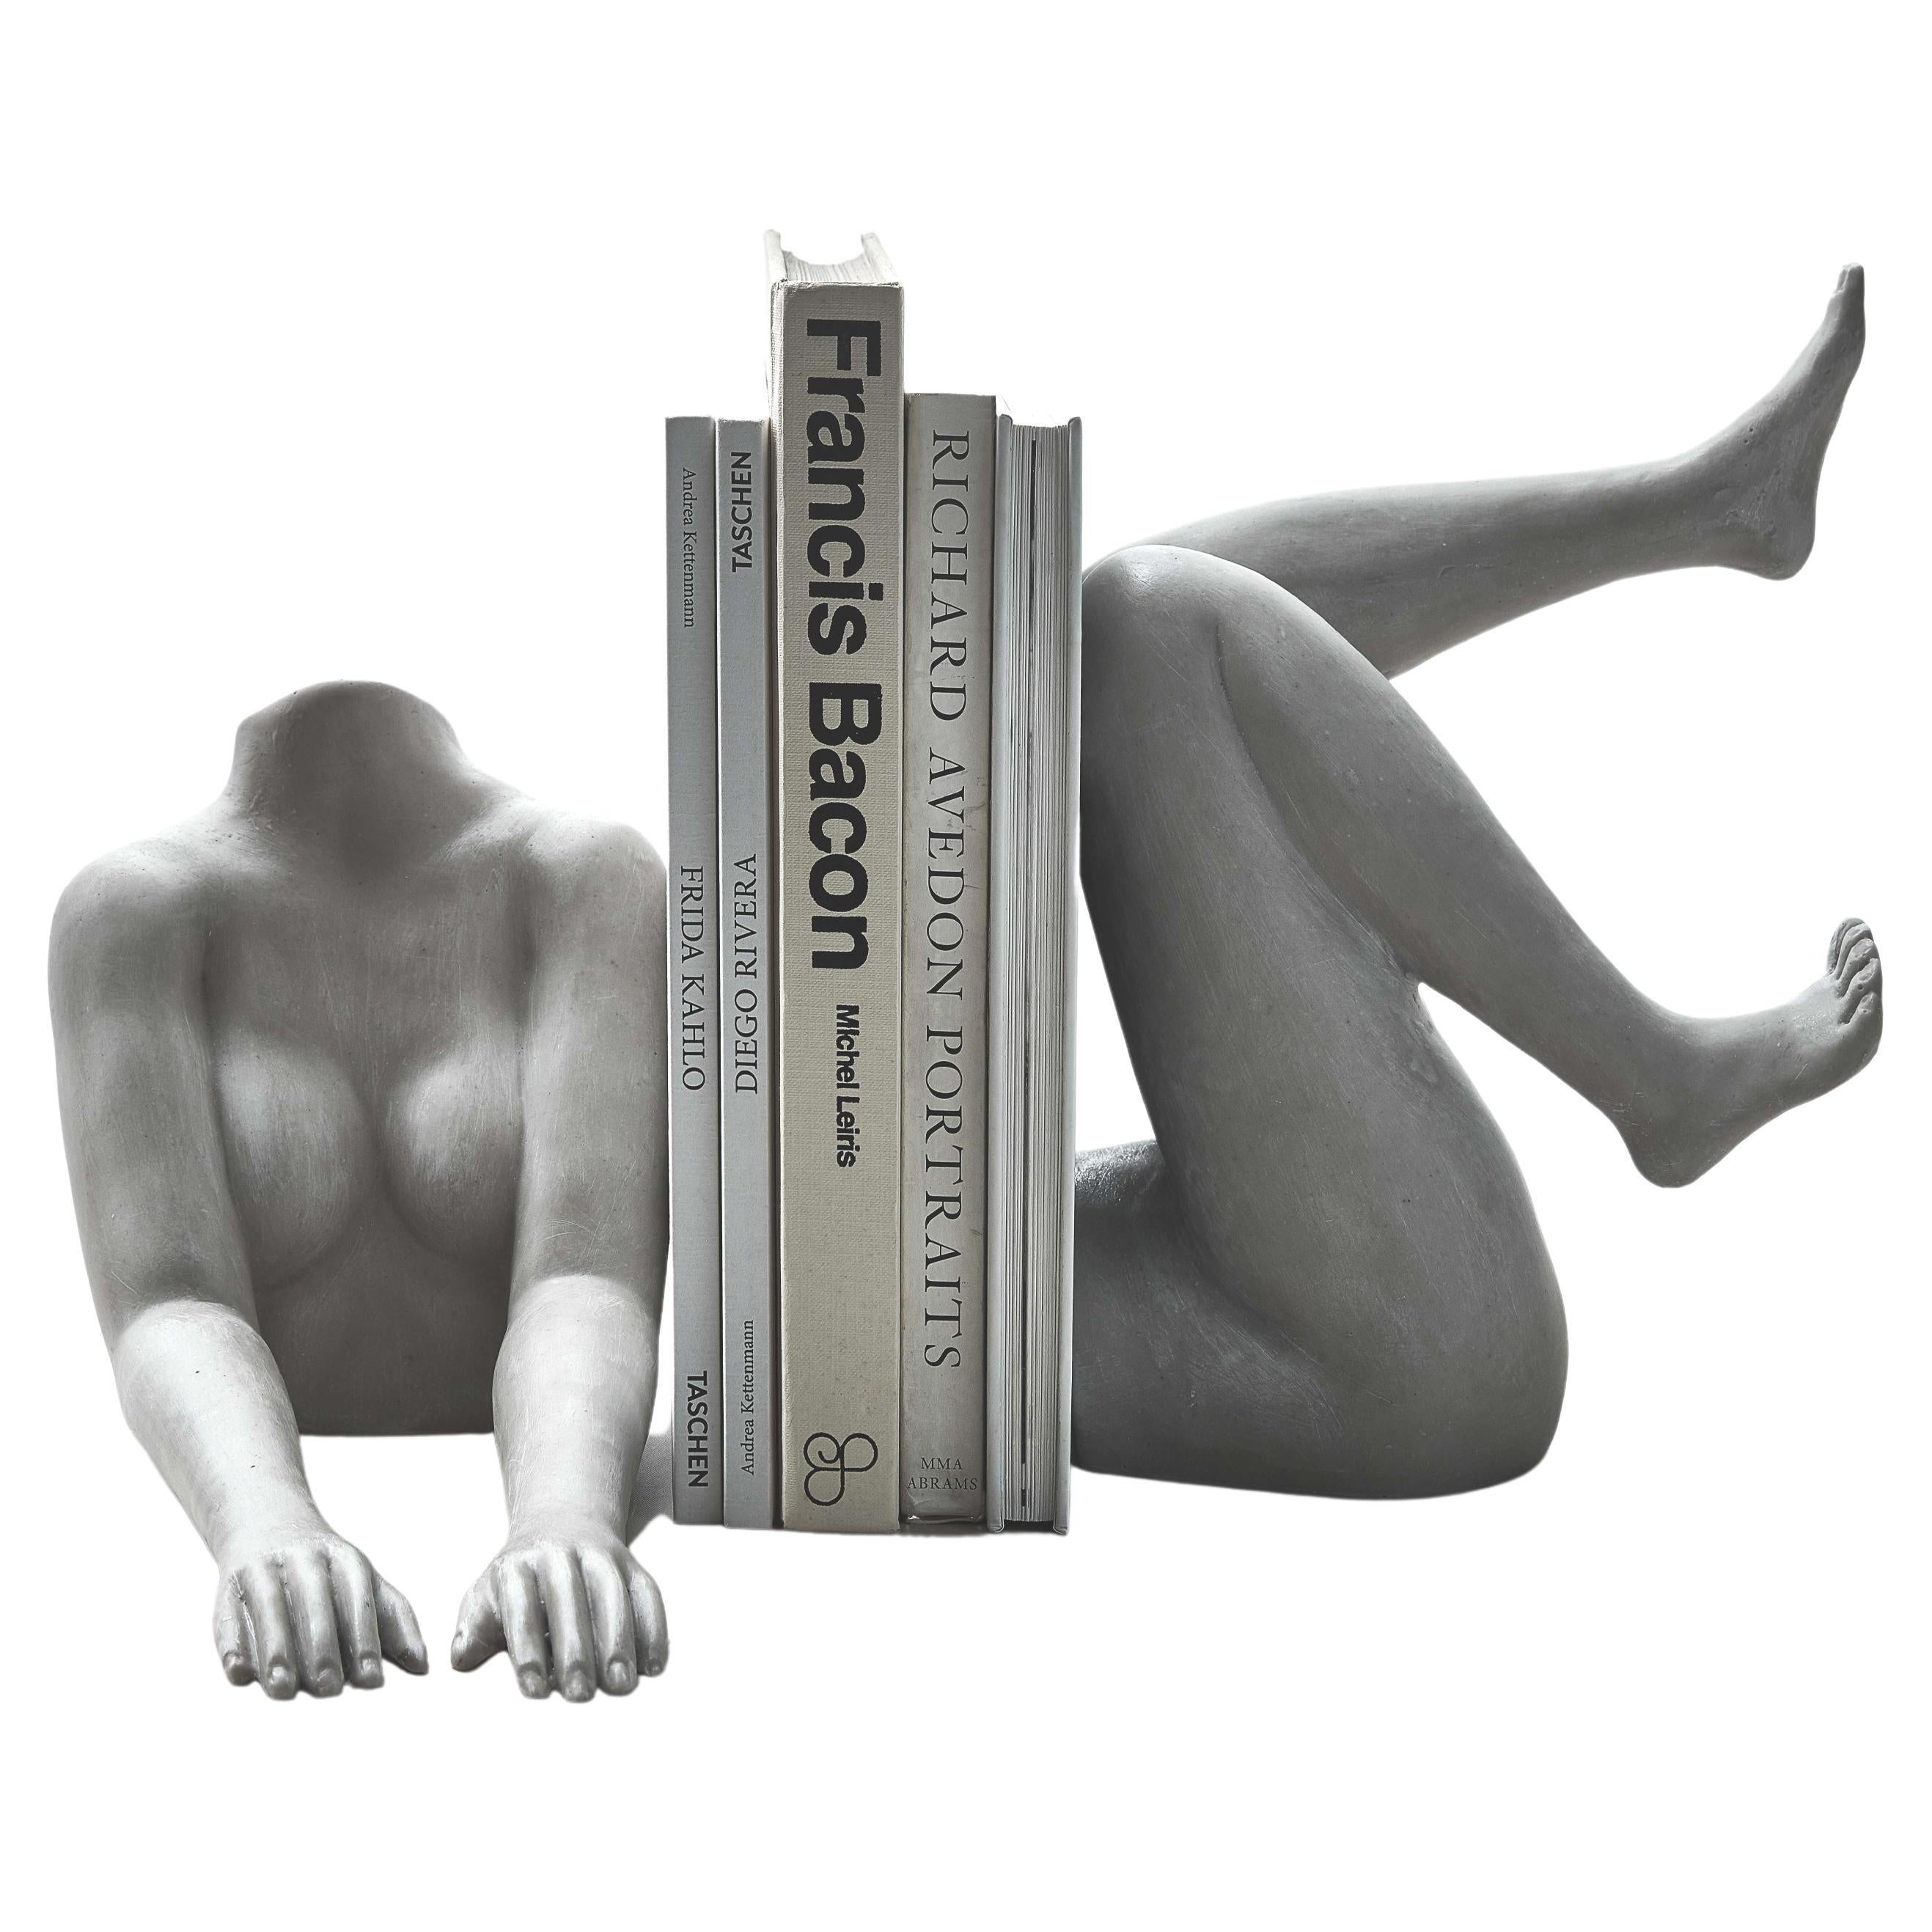 Il Corpo Sculptural Bookends Portraying Female Body Hand Crafted Resin Stone